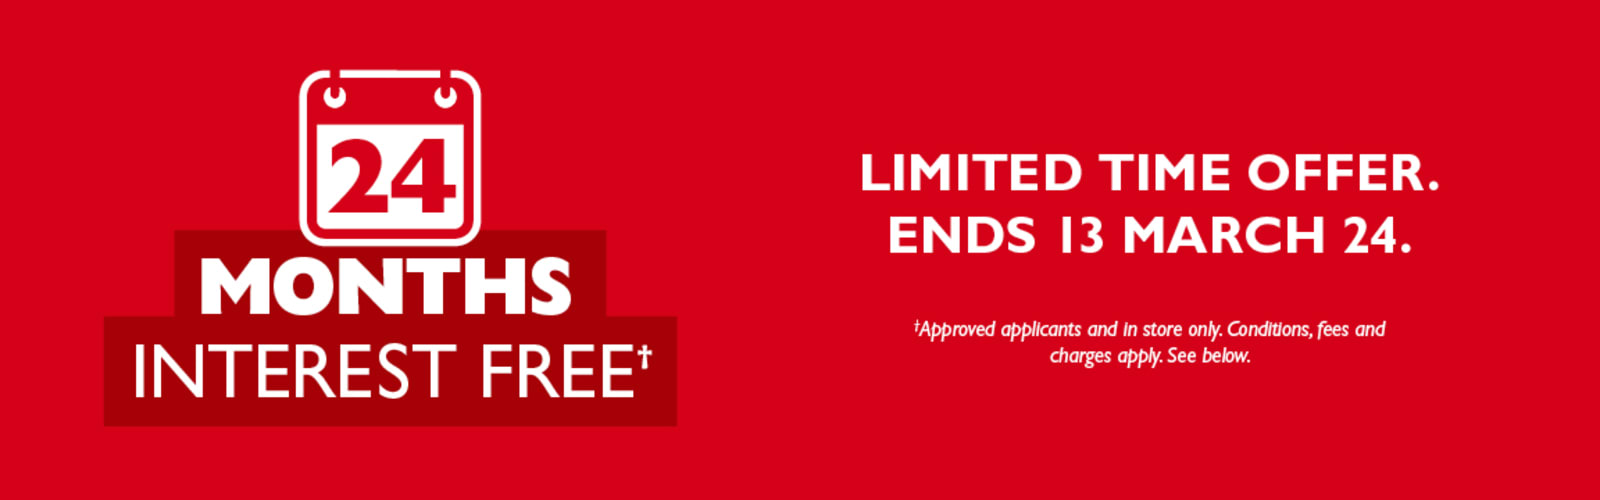 24 months interest free* | Limited time offer. Ends 13 Mar 24. Approved applicants and in store only. Conditions, fees and charges apply. See below.